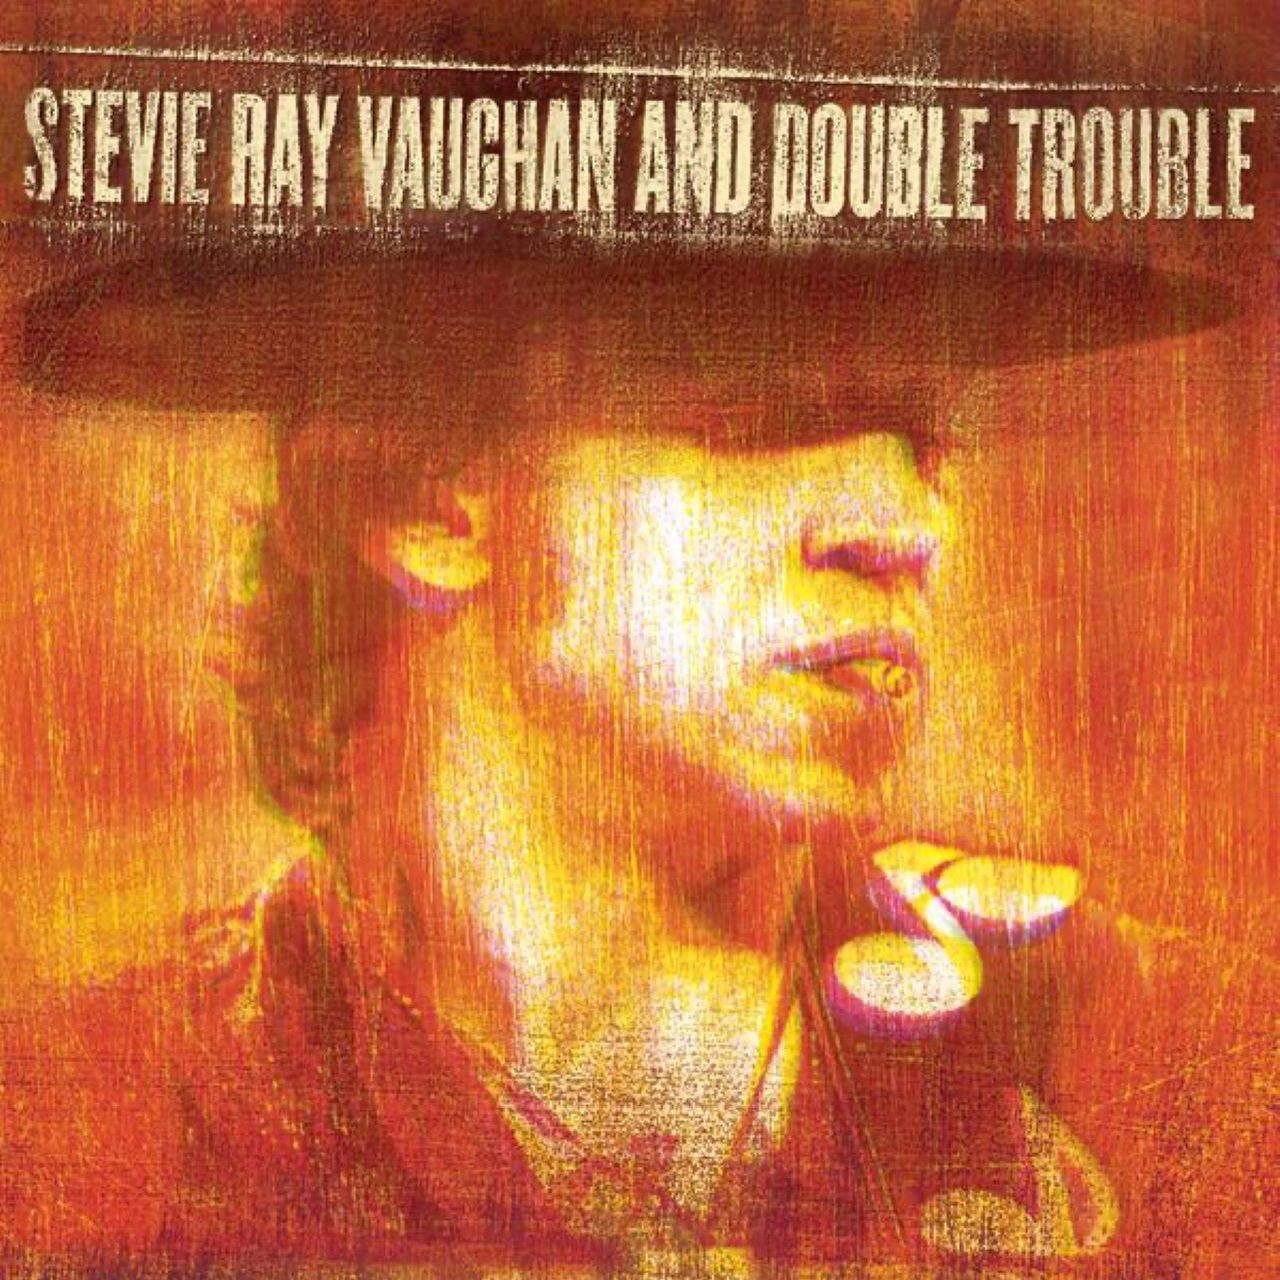 Stevie Ray Vaughan And Double Trouble – Live At Montreux 1982 & 1985 cover album